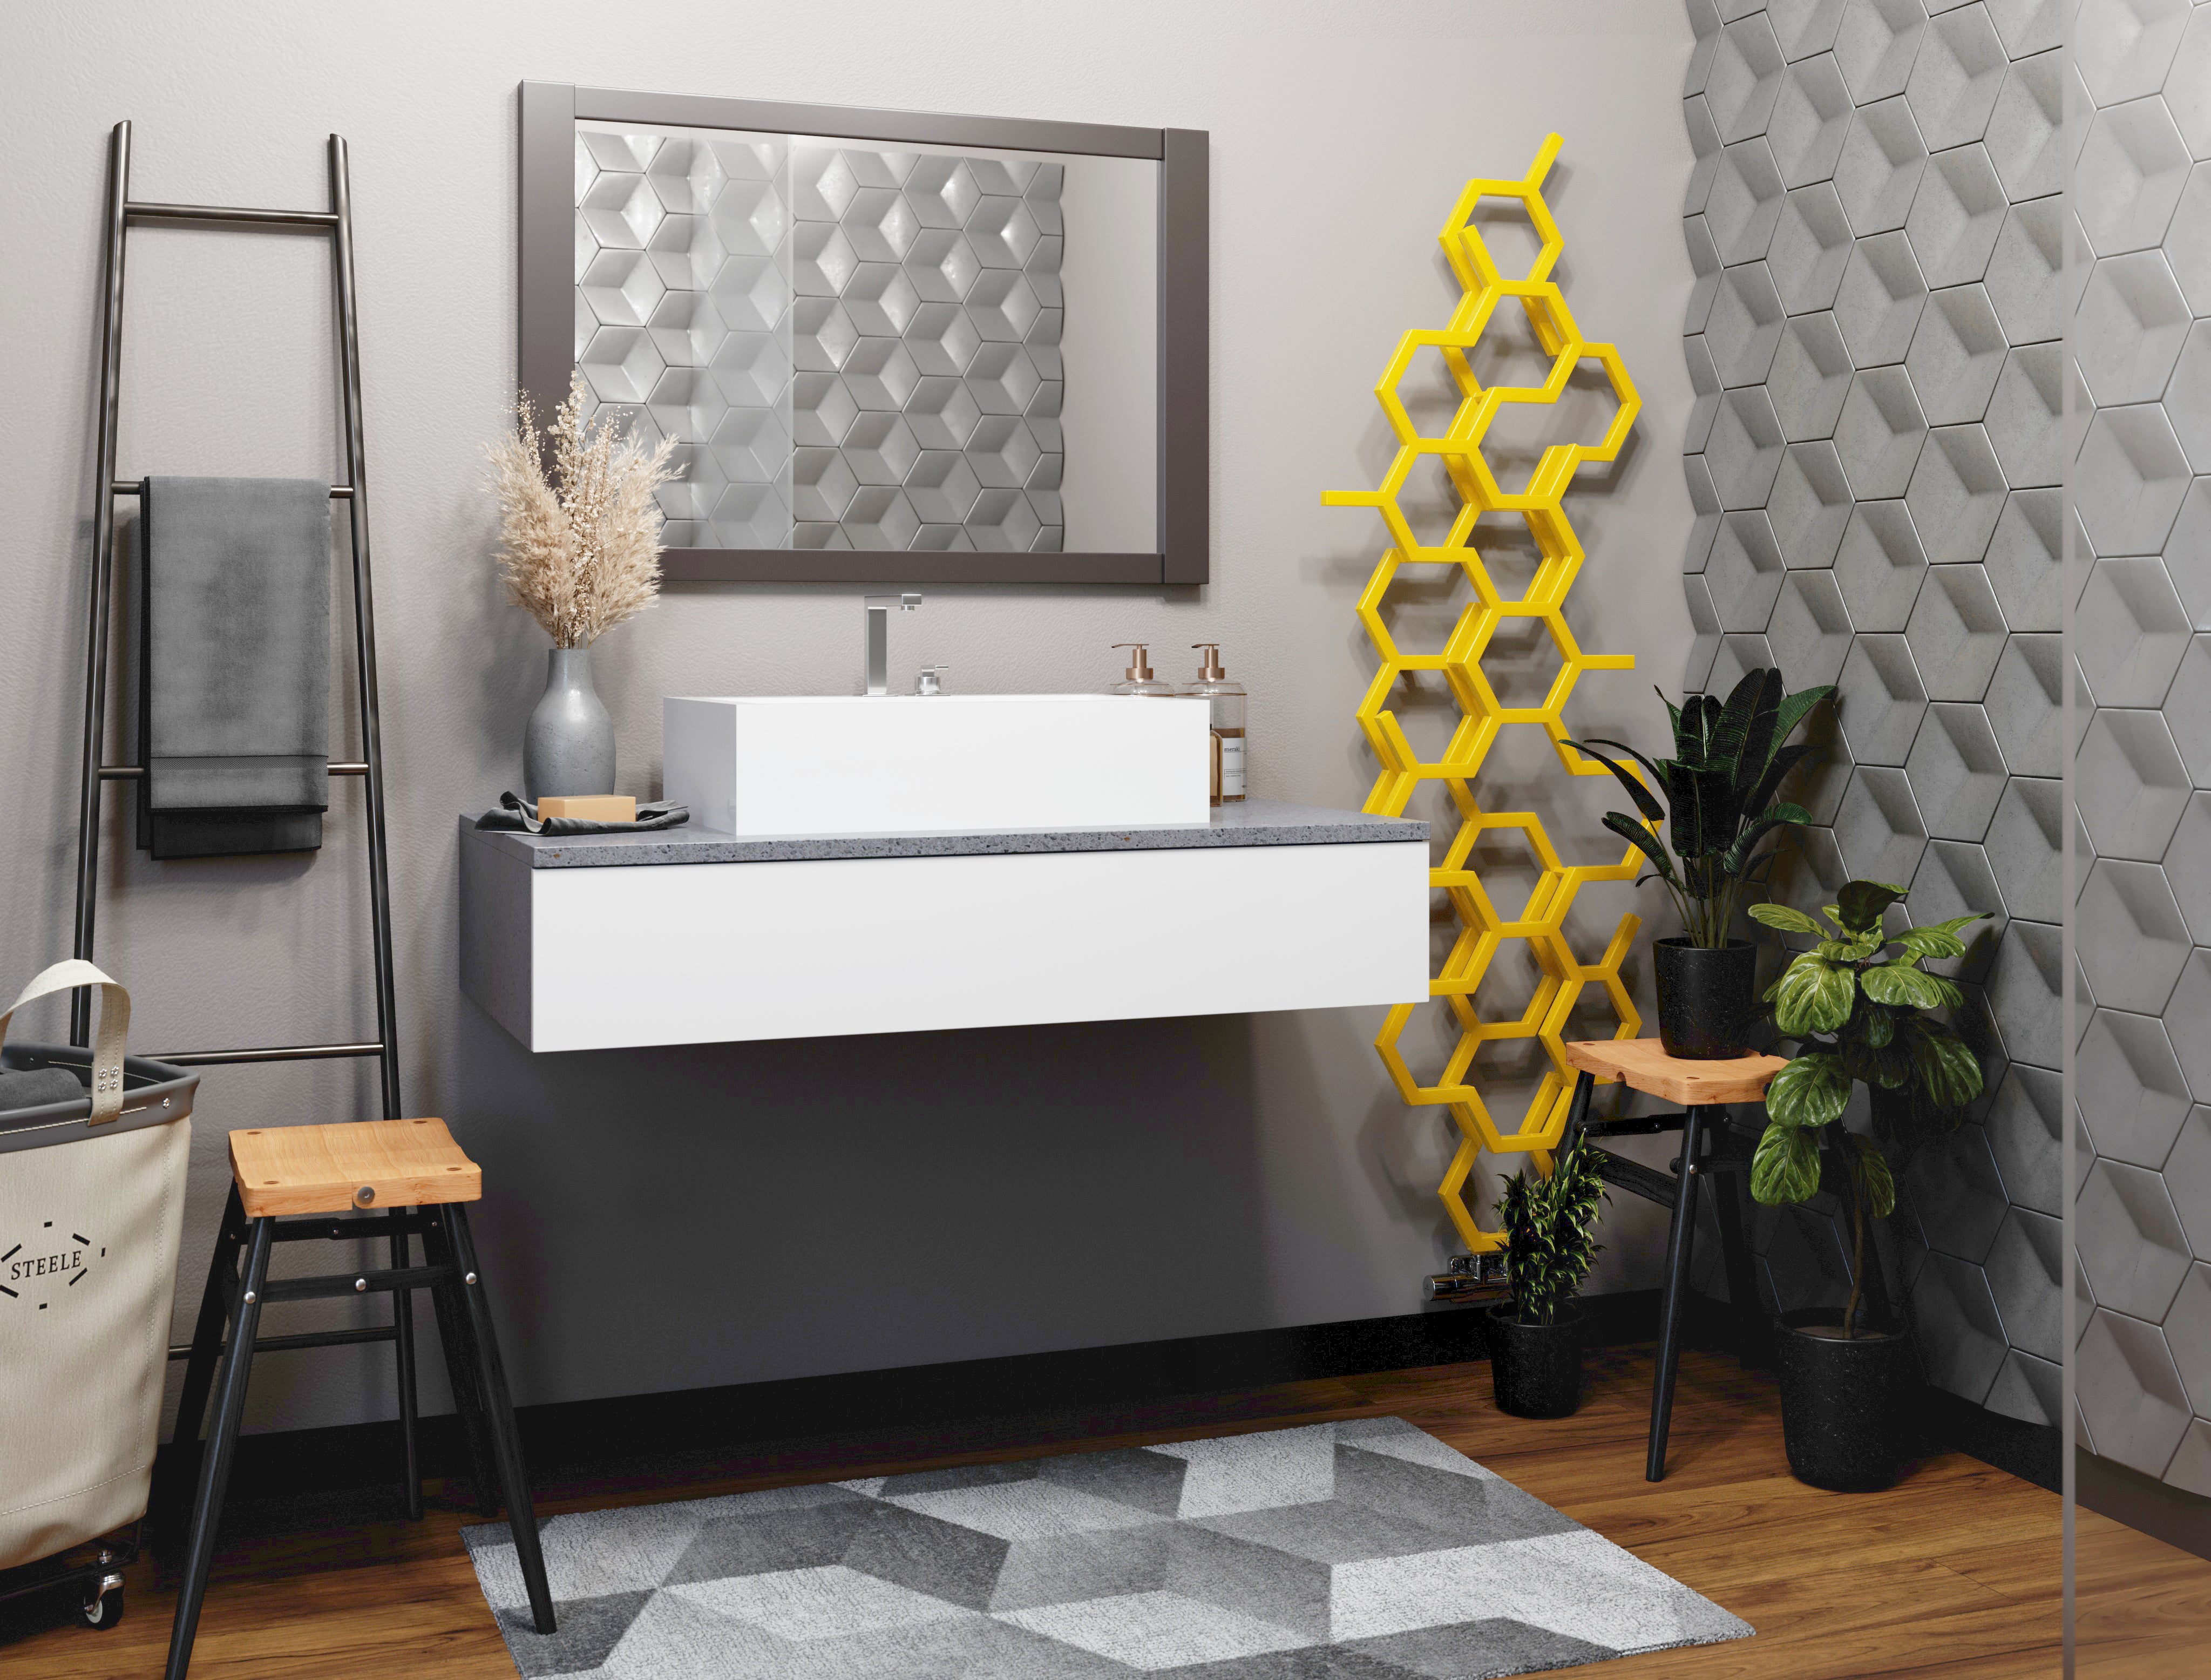 A modern bathroom featuring the mustard-yellow ‘Hex’ radiator from UK Radiators, which is made up of hexagons to resemble a beehive.